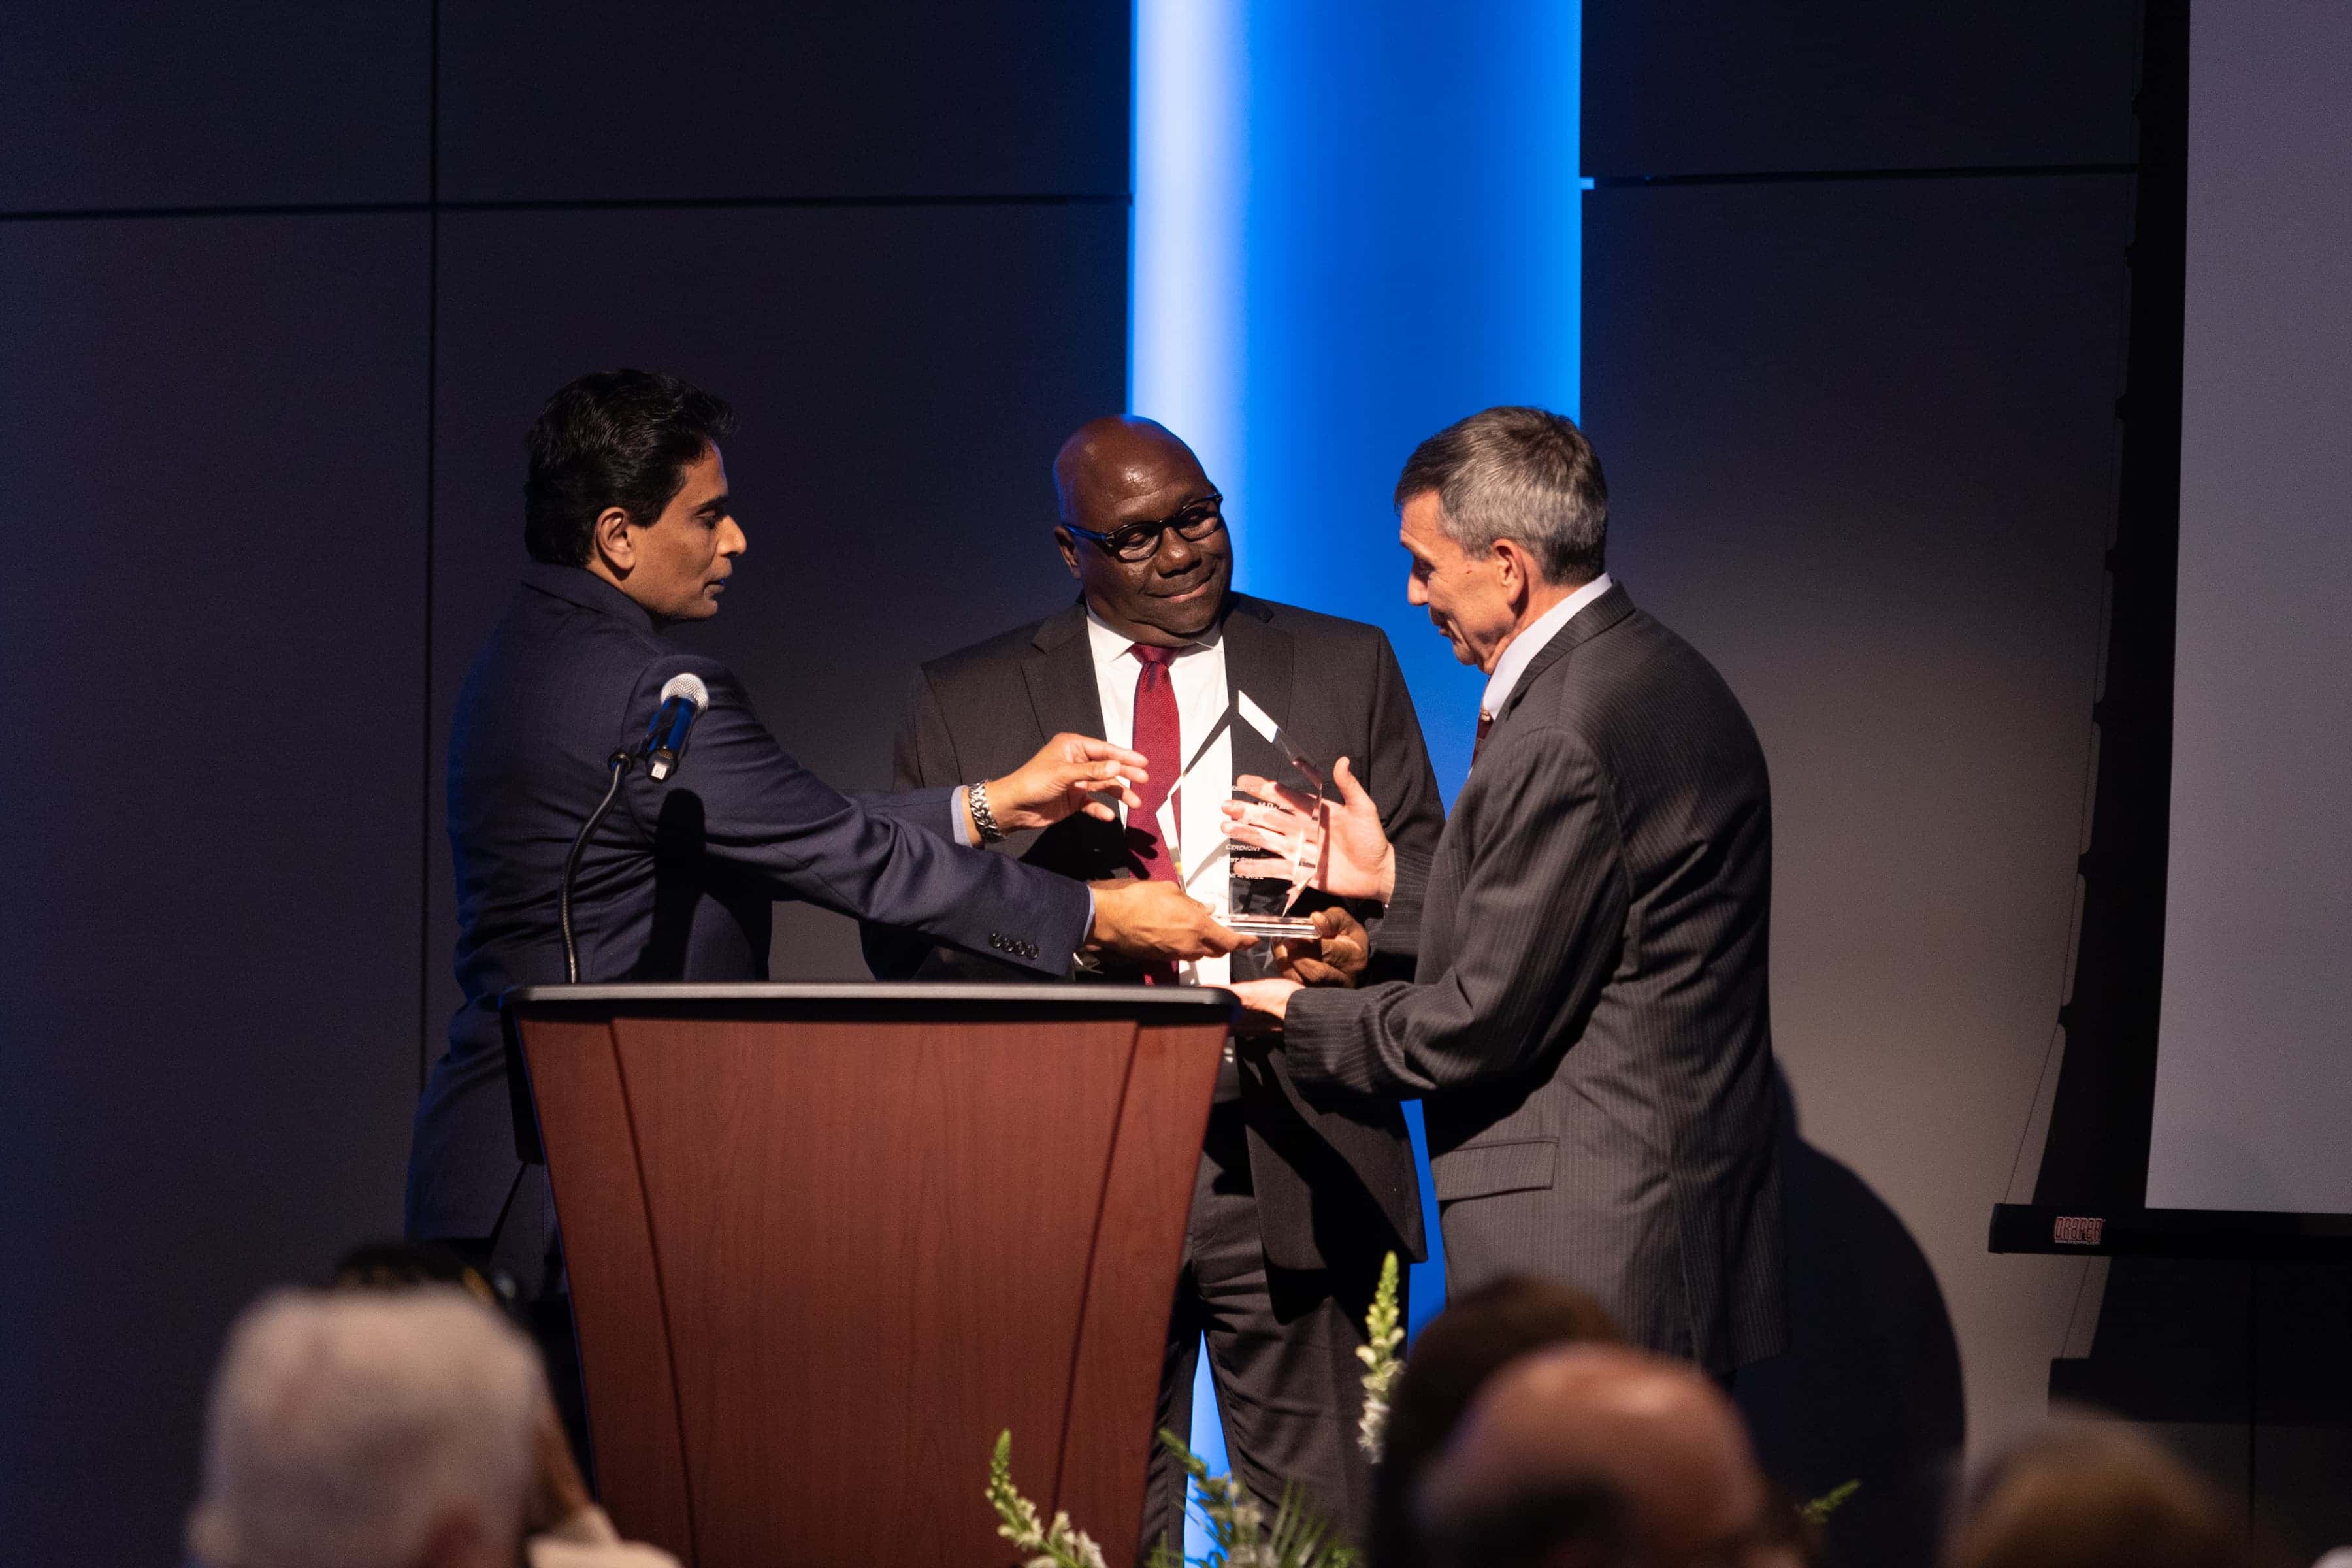 Dr. Doug Bacon Receiving Award from Dr. Claude Brunson and Dr. Anand Prem